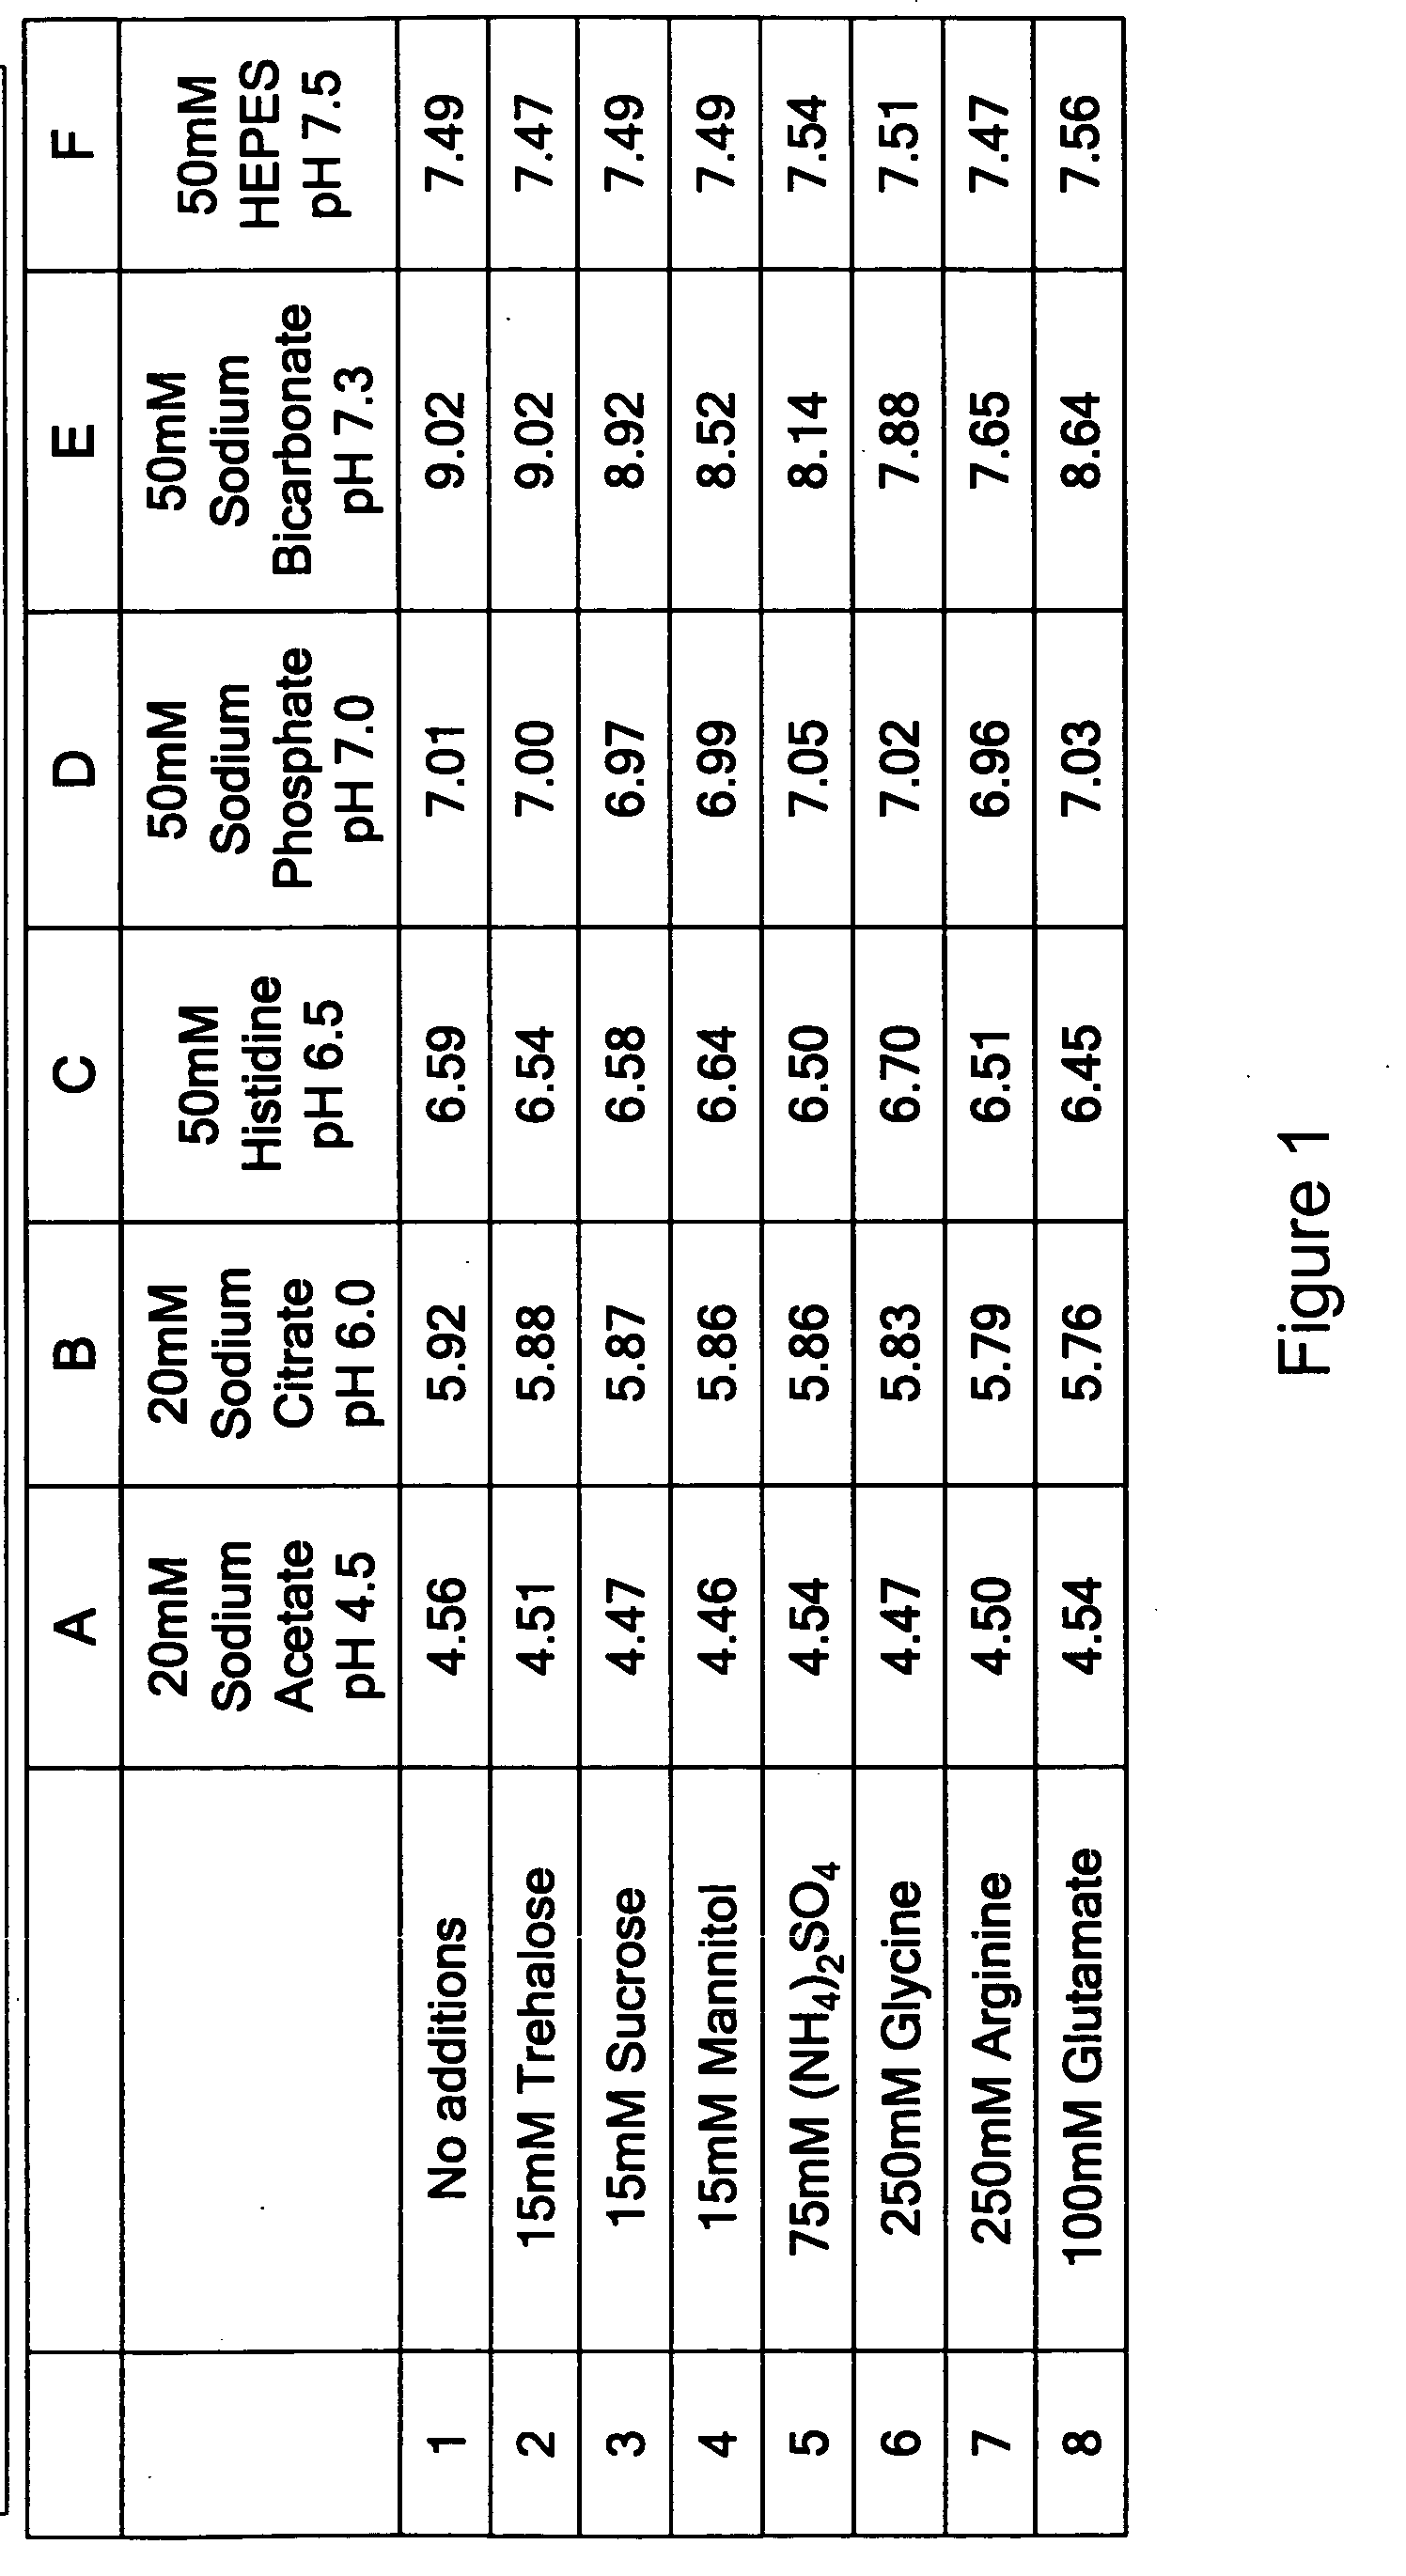 Formulations of human growth hormone comprising a non-naturally encoded amino acid